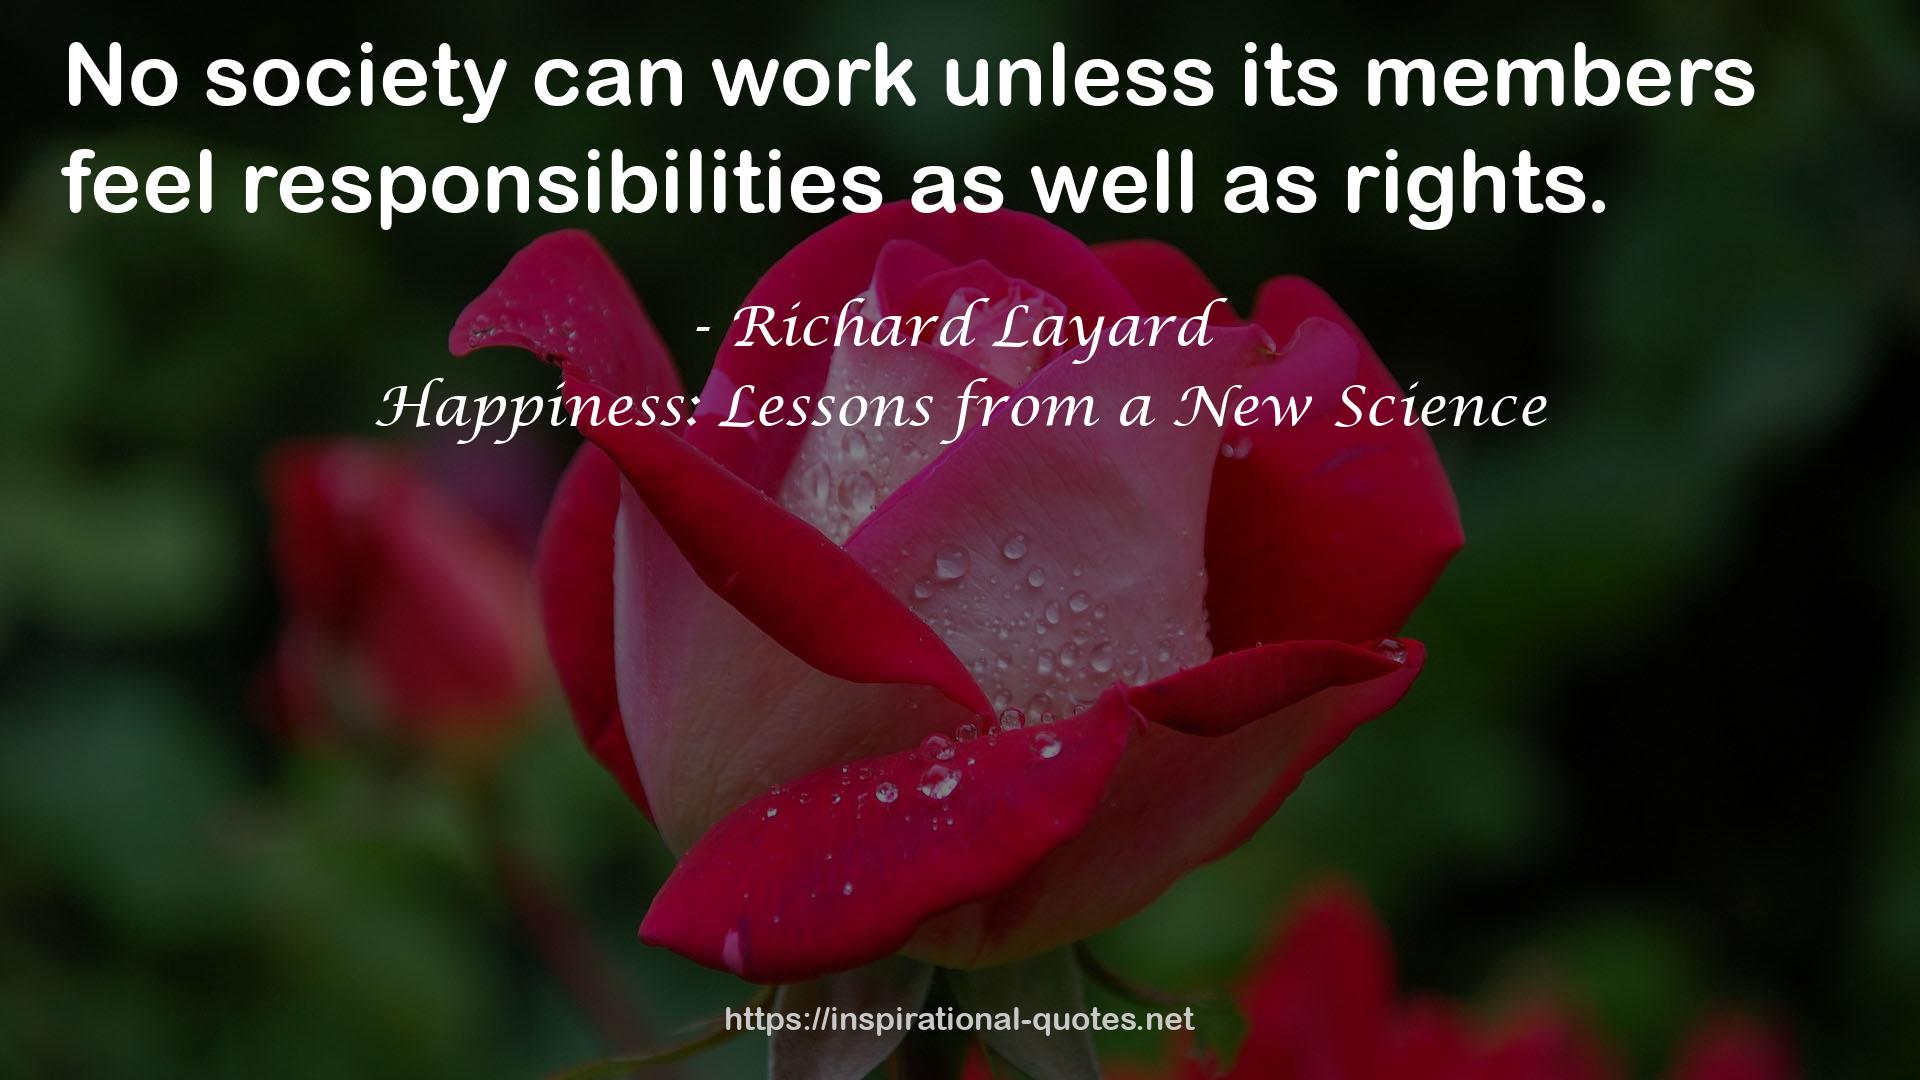 Happiness: Lessons from a New Science QUOTES